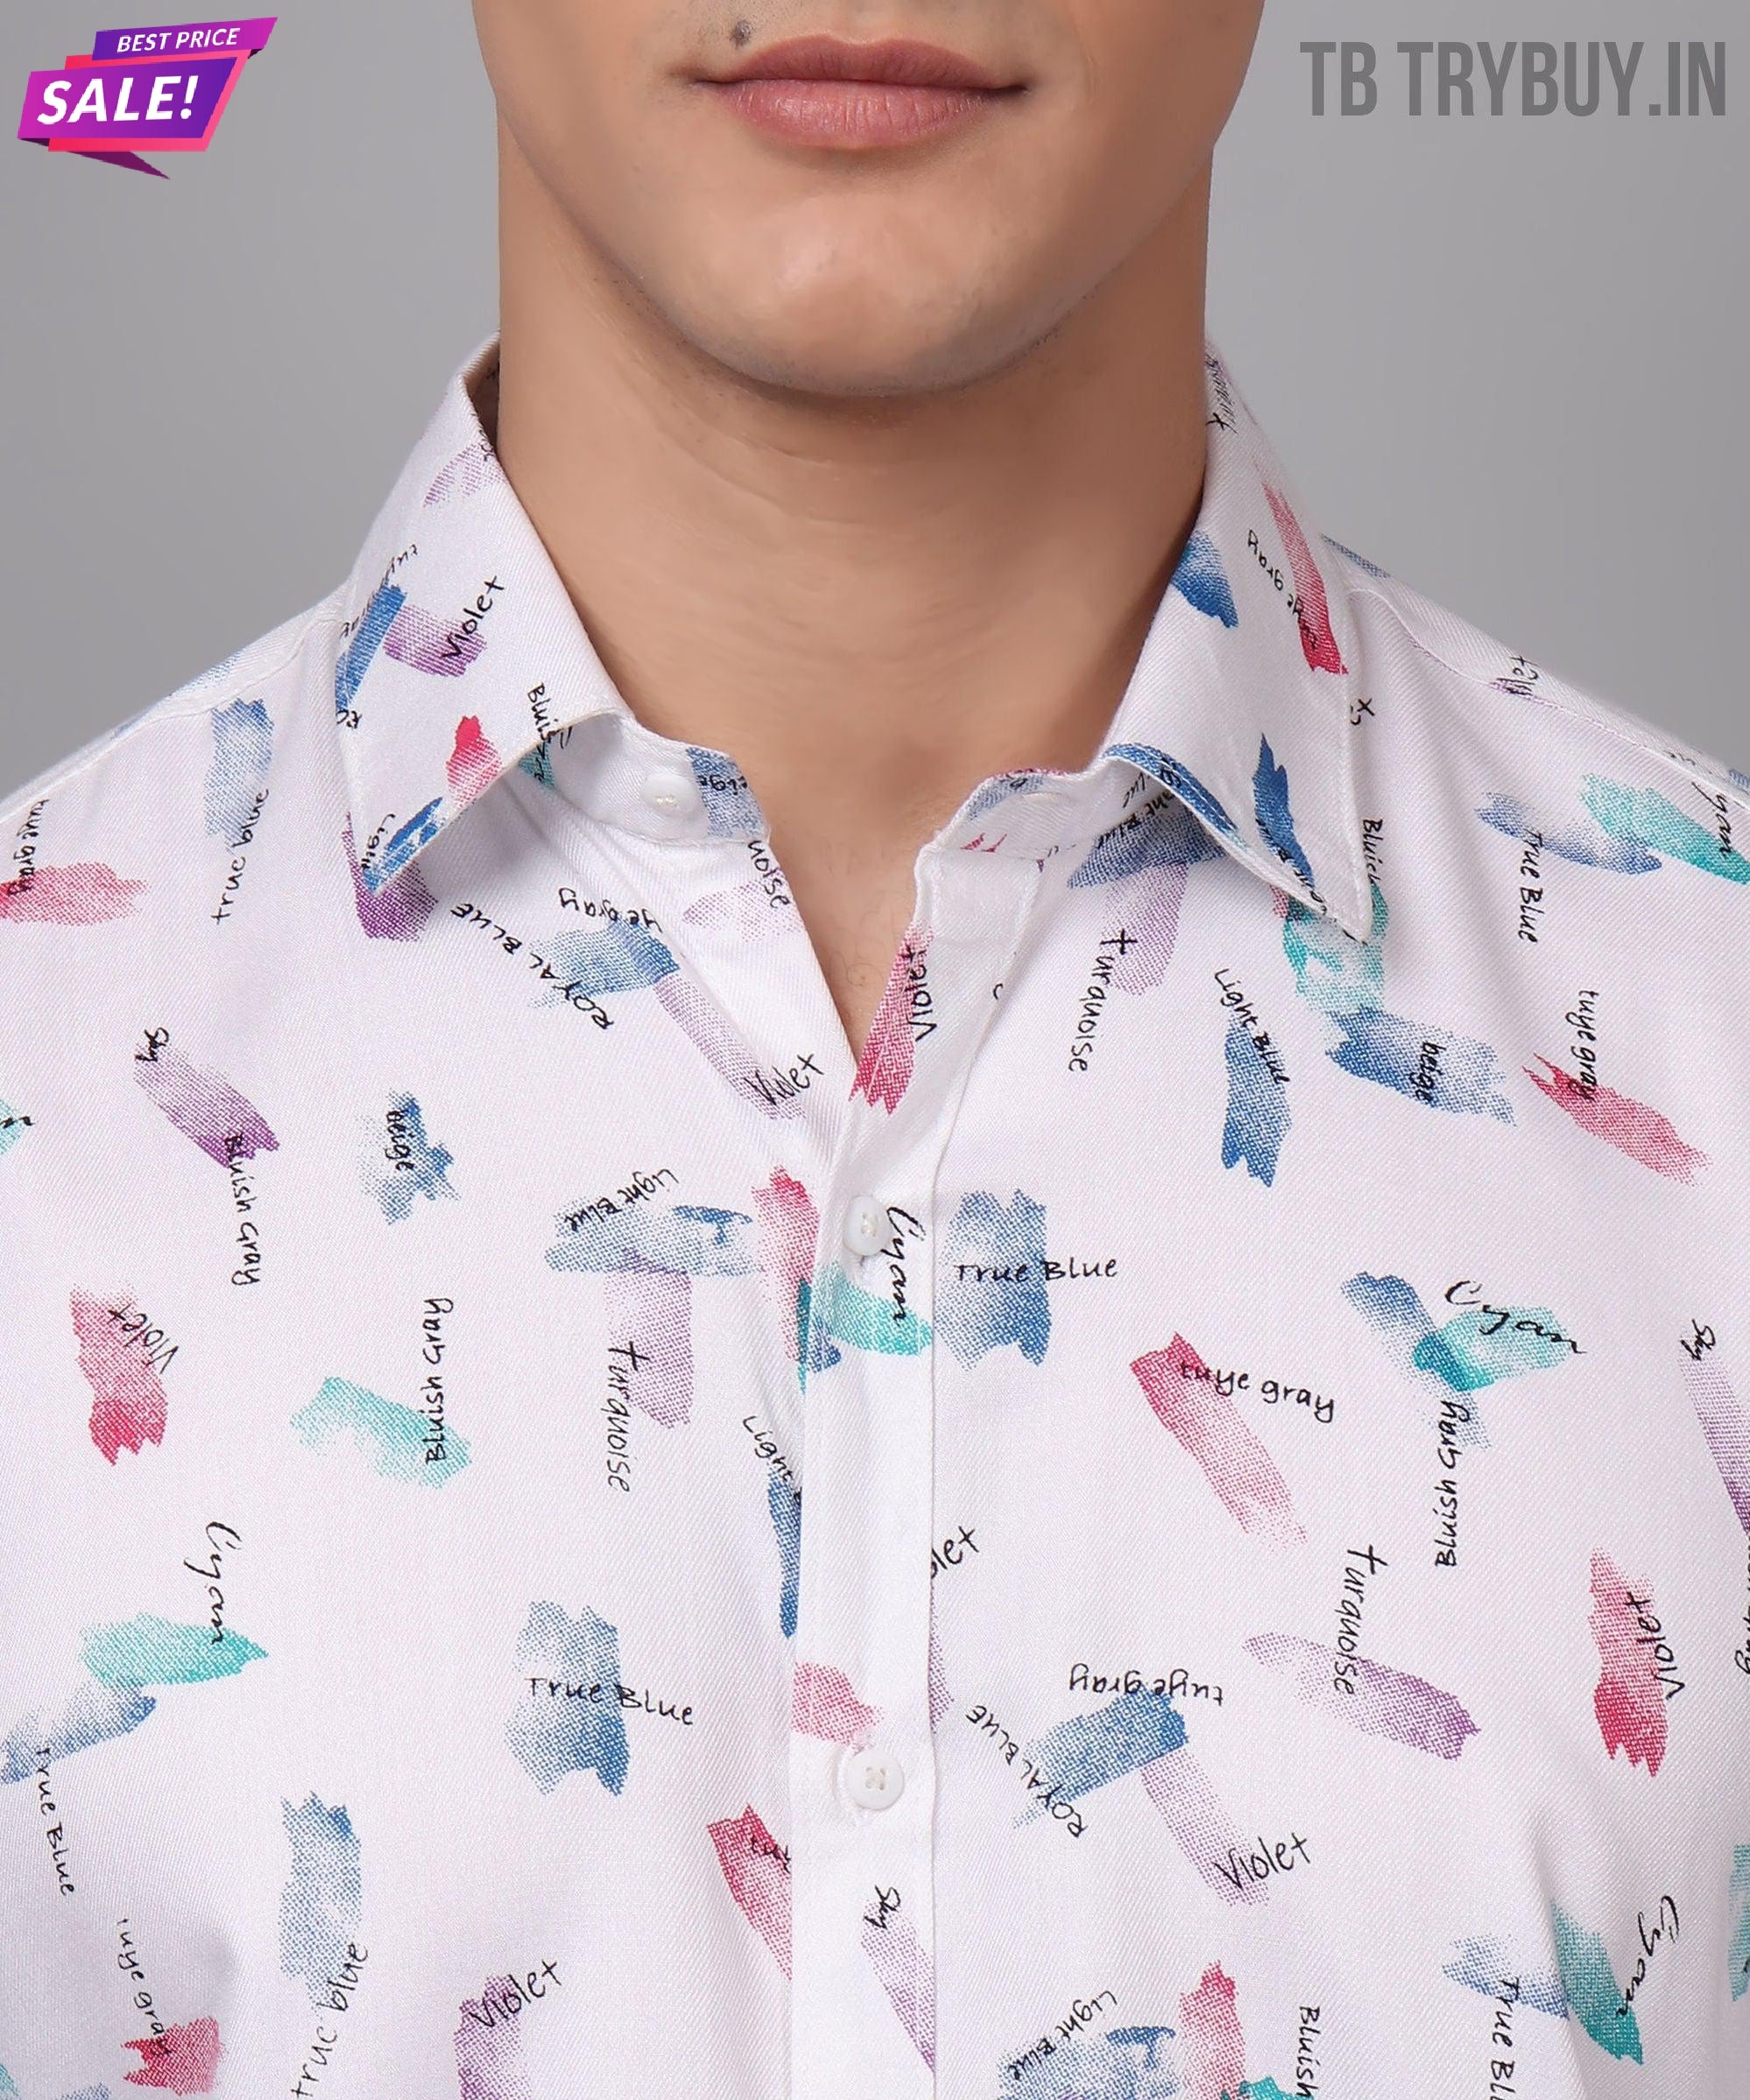 Trybuy Premium Glamorous Printed Multi Colored Cotton Casual Shirt for Men